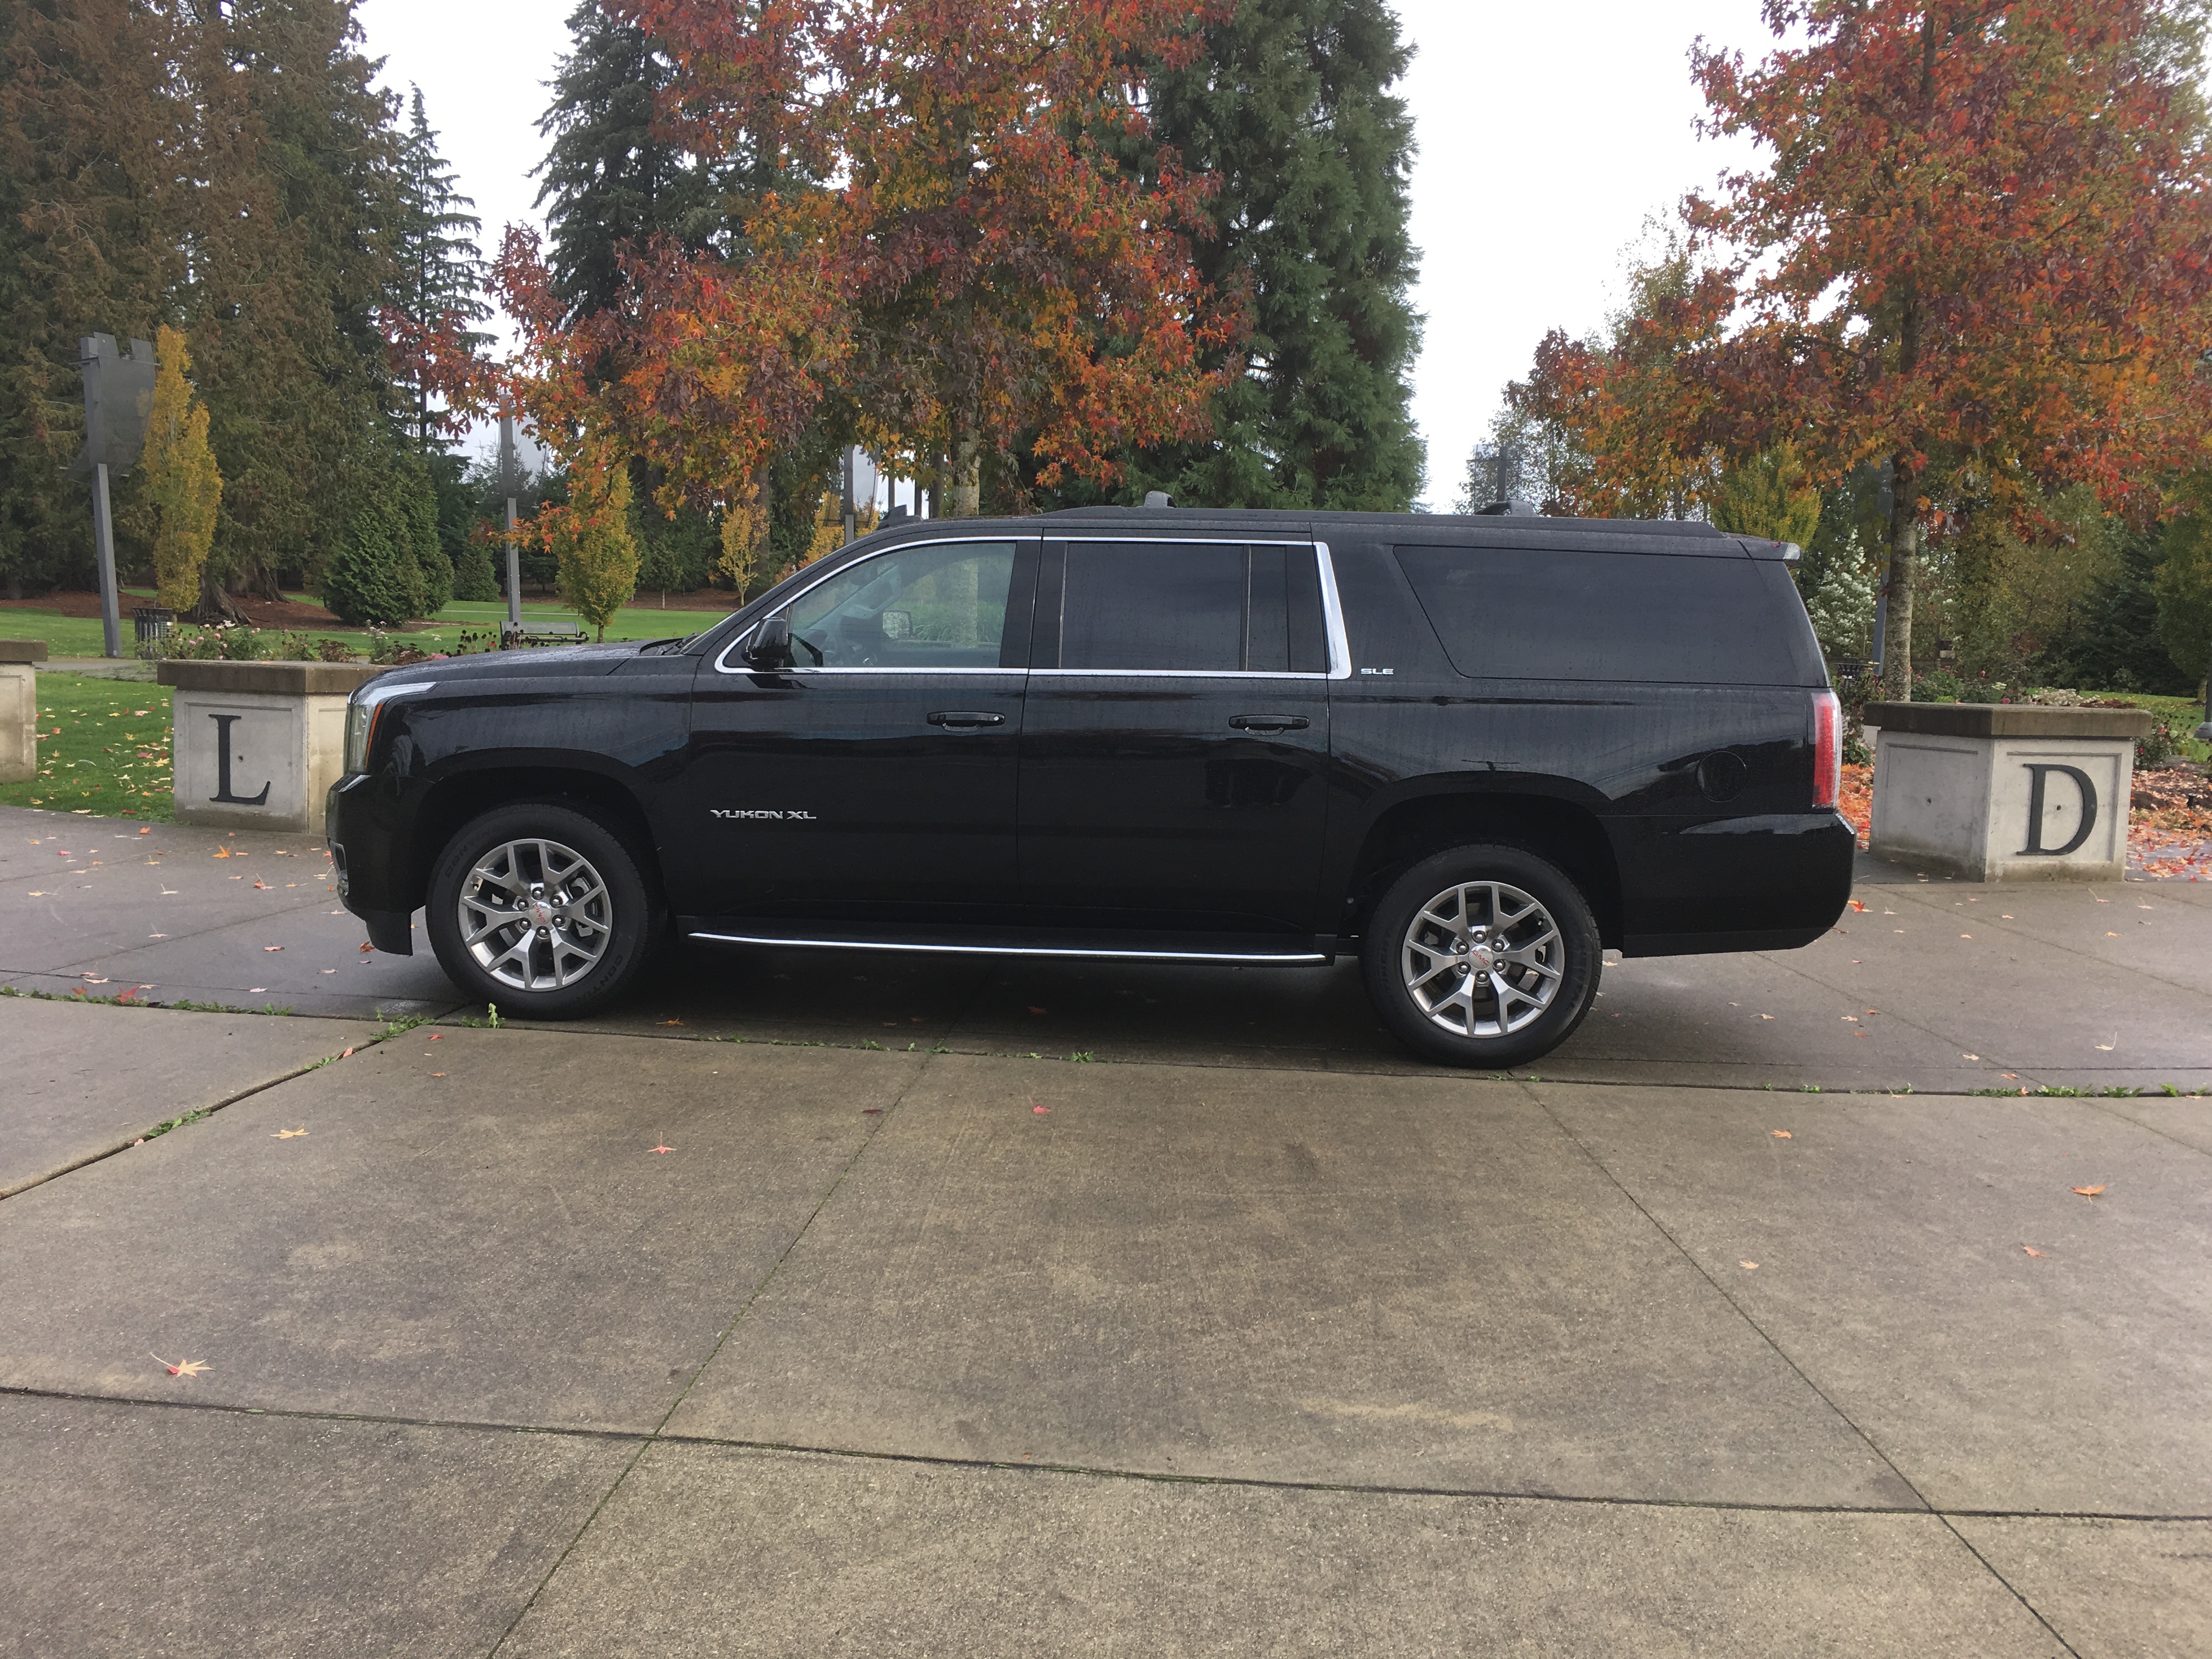 Limousine service – Make your corporate transfers professional and outstanding